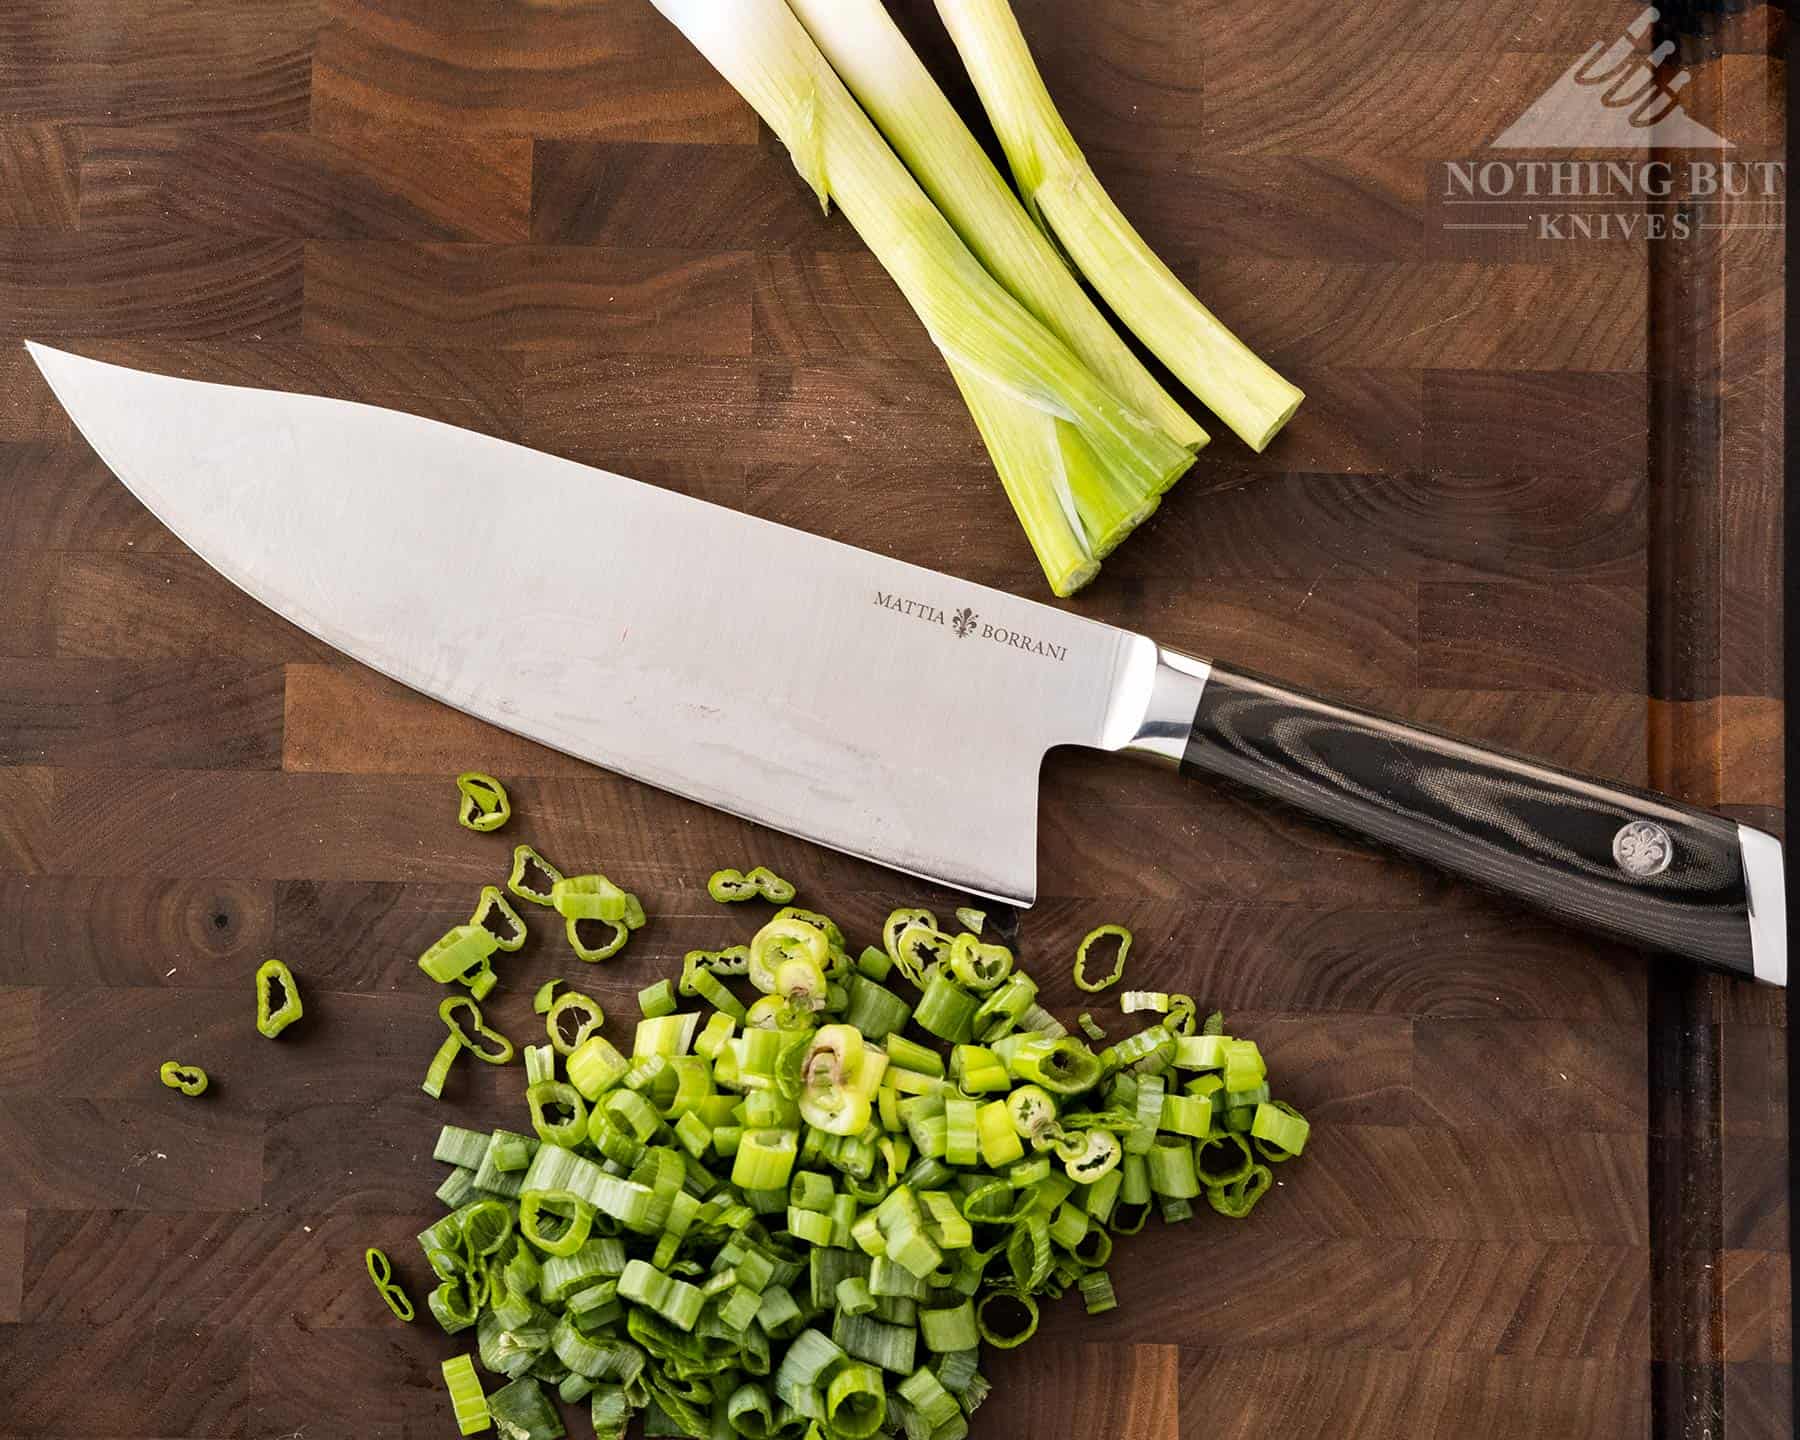 If you like Bowie knives the Mattia Borrani chef knife is a good option. It is shown here on a cutting for with green onions. 